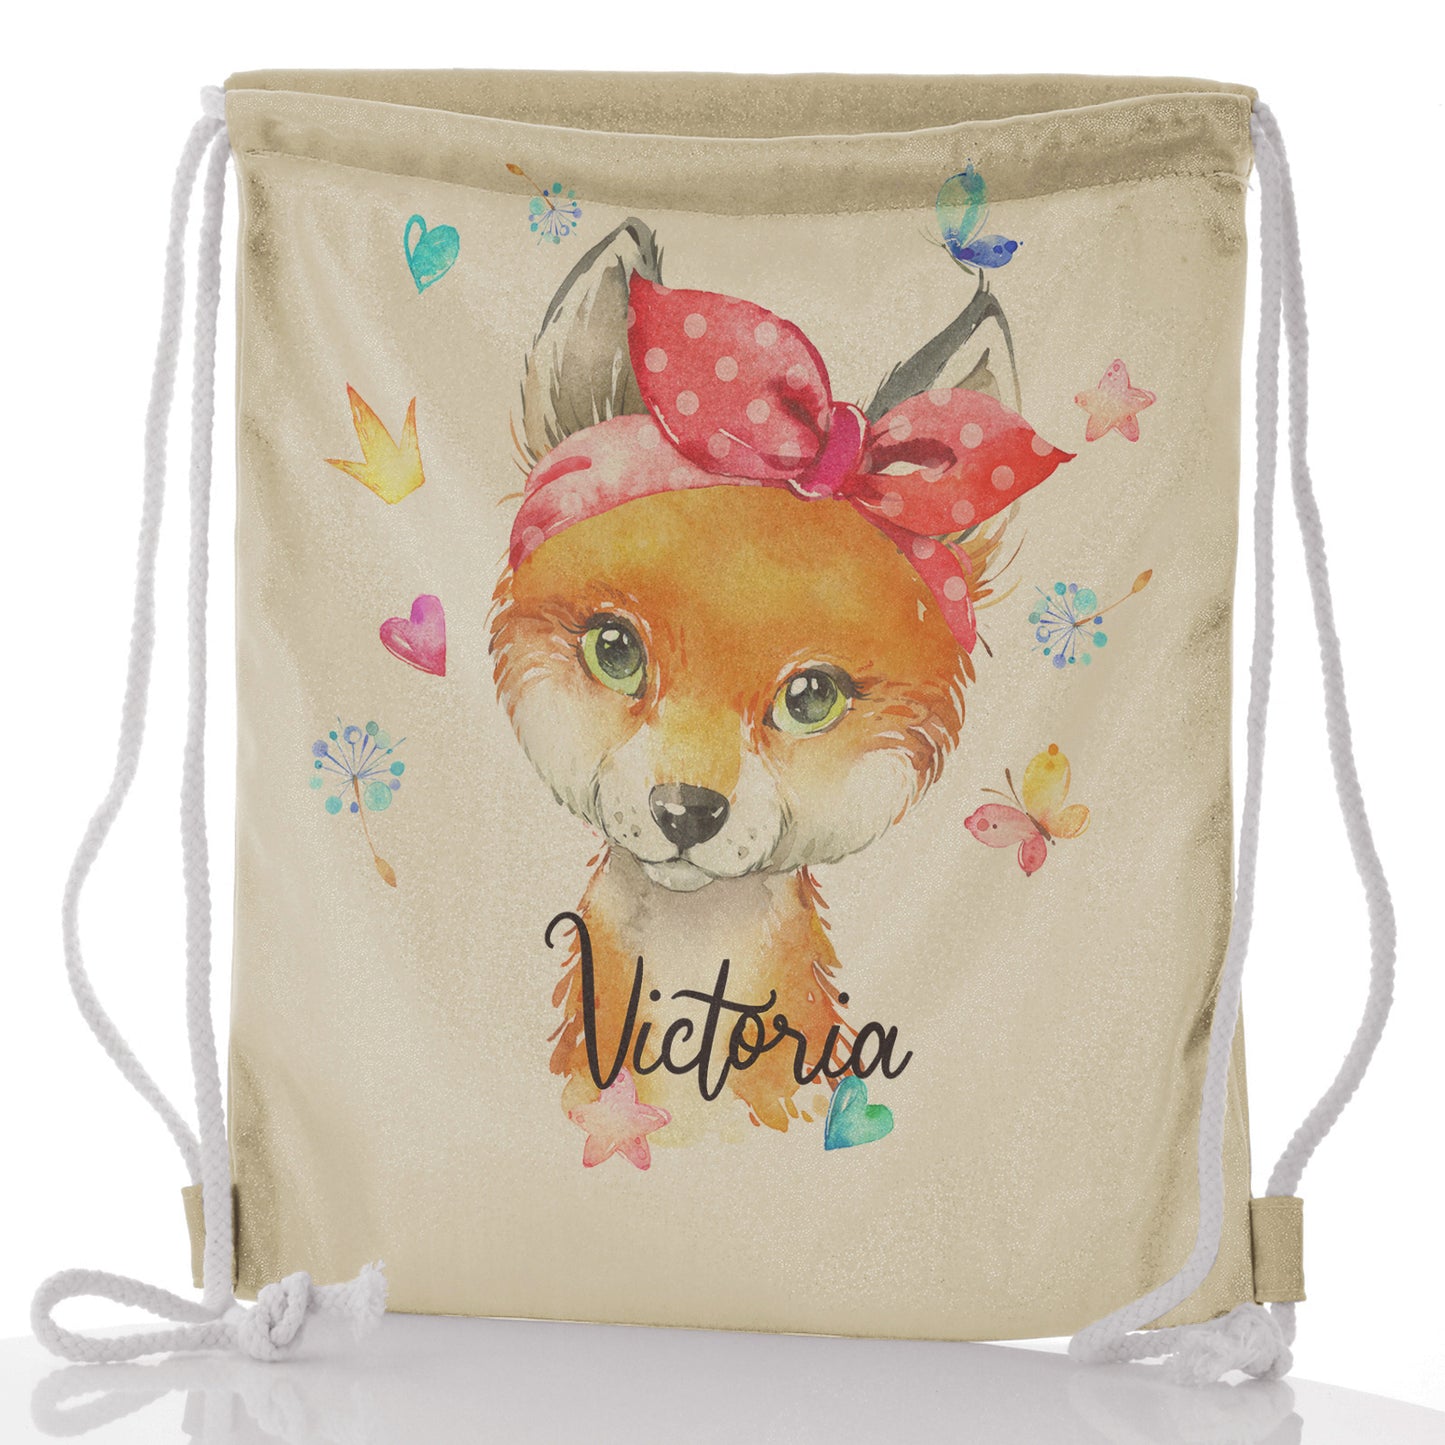 Personalised Glitter Drawstring Backpack with Red Fox with Hearts Dandelion Butterflies and Cute Text